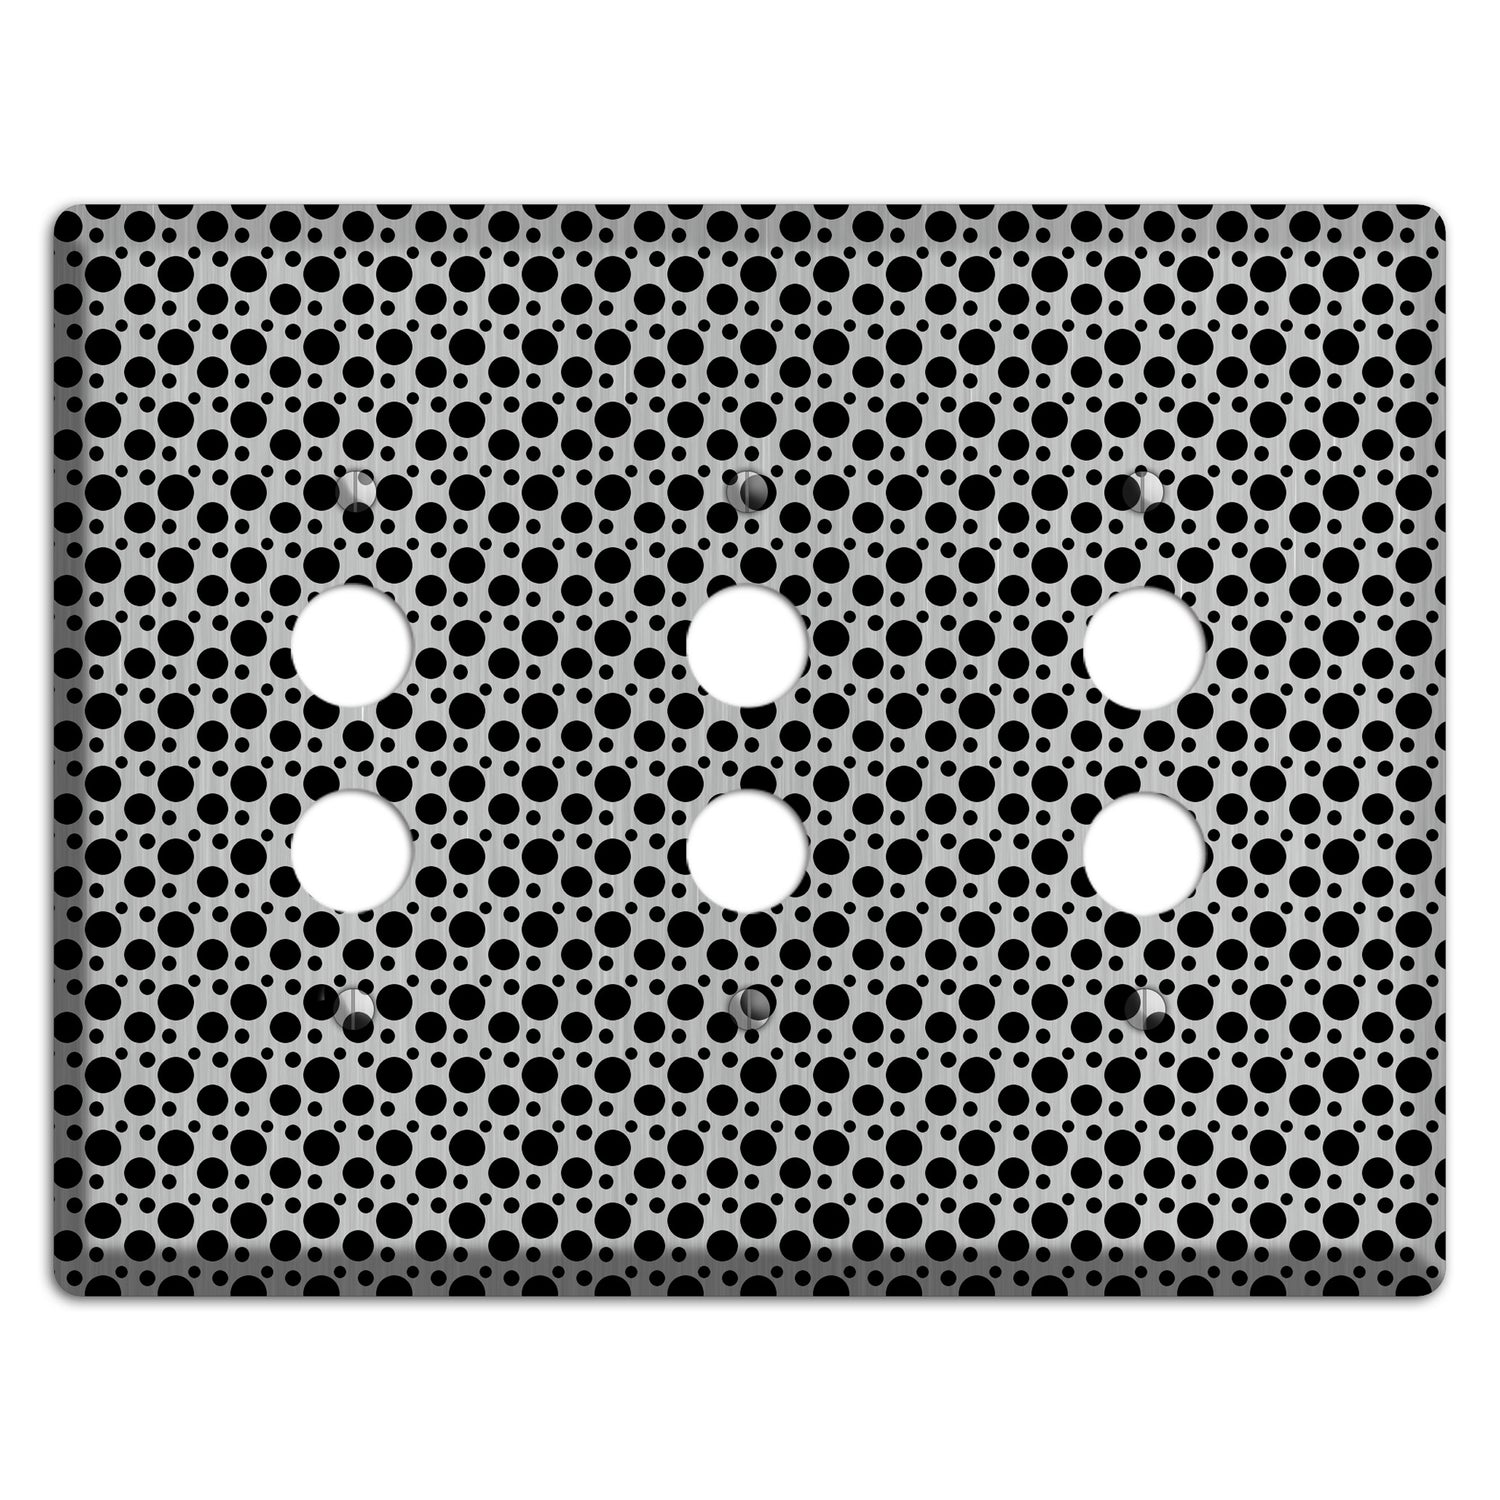 Small and Tiny Polka Dots Stainless 3 Pushbutton Wallplate